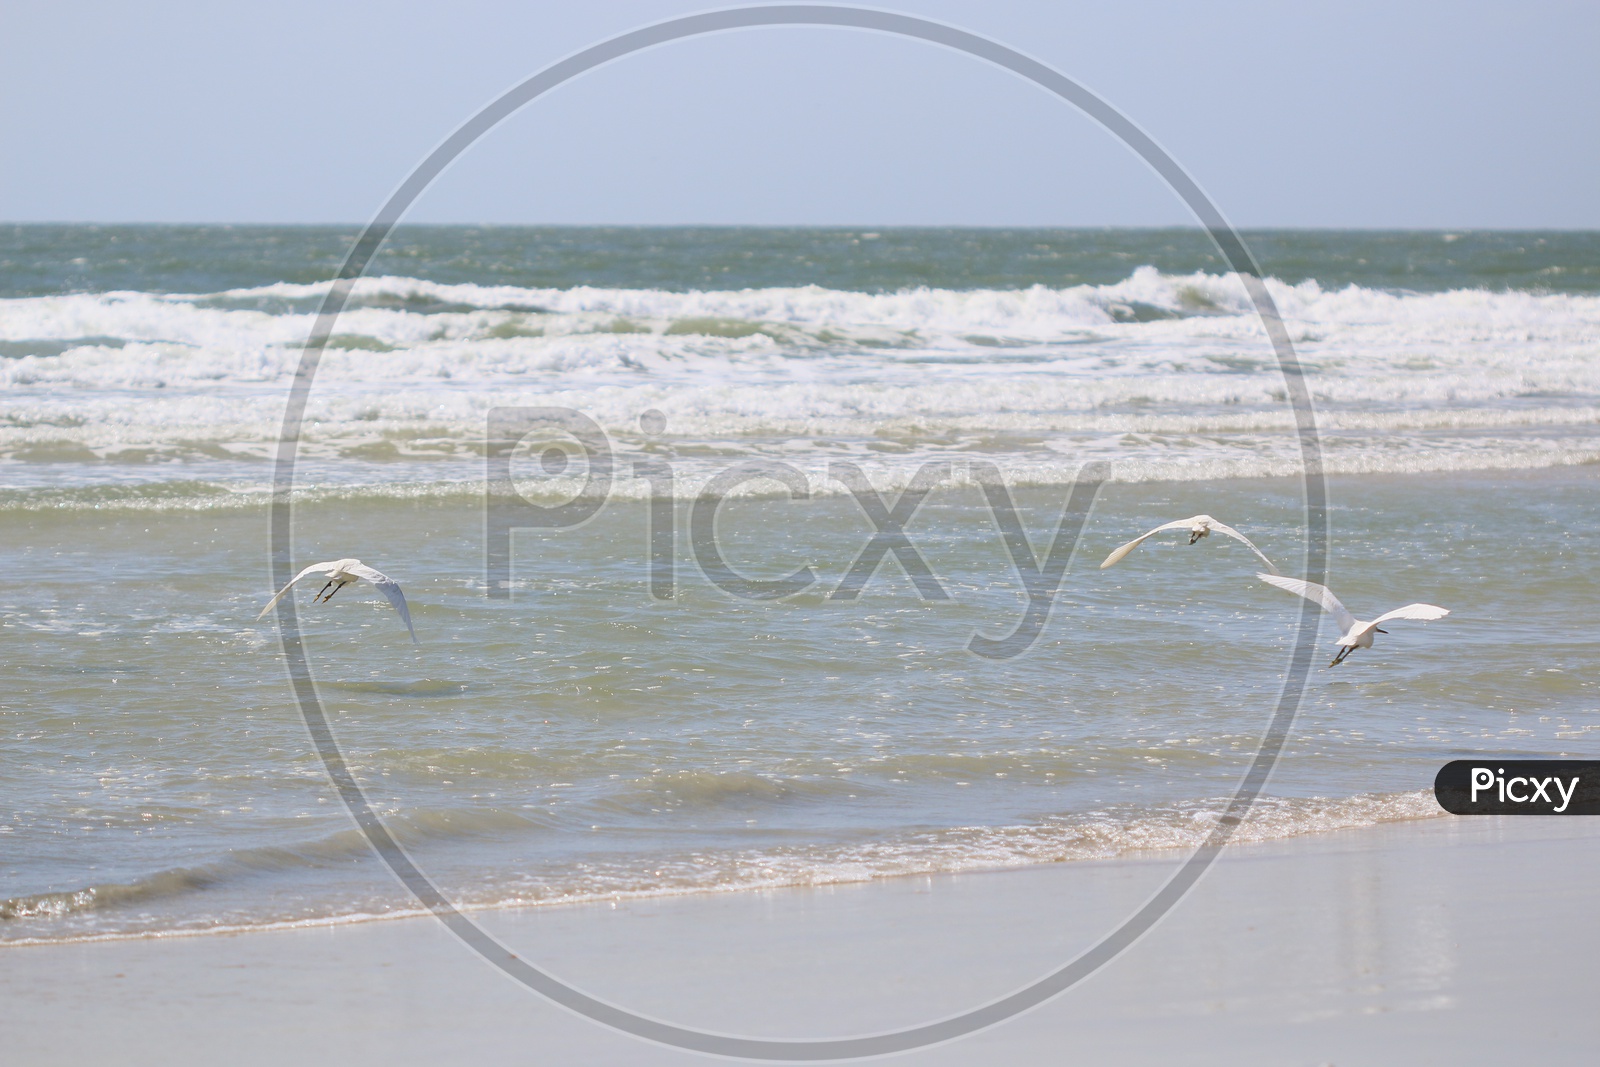 Indian Cranes on  a Beach of A Sea With Sea Waves as Background